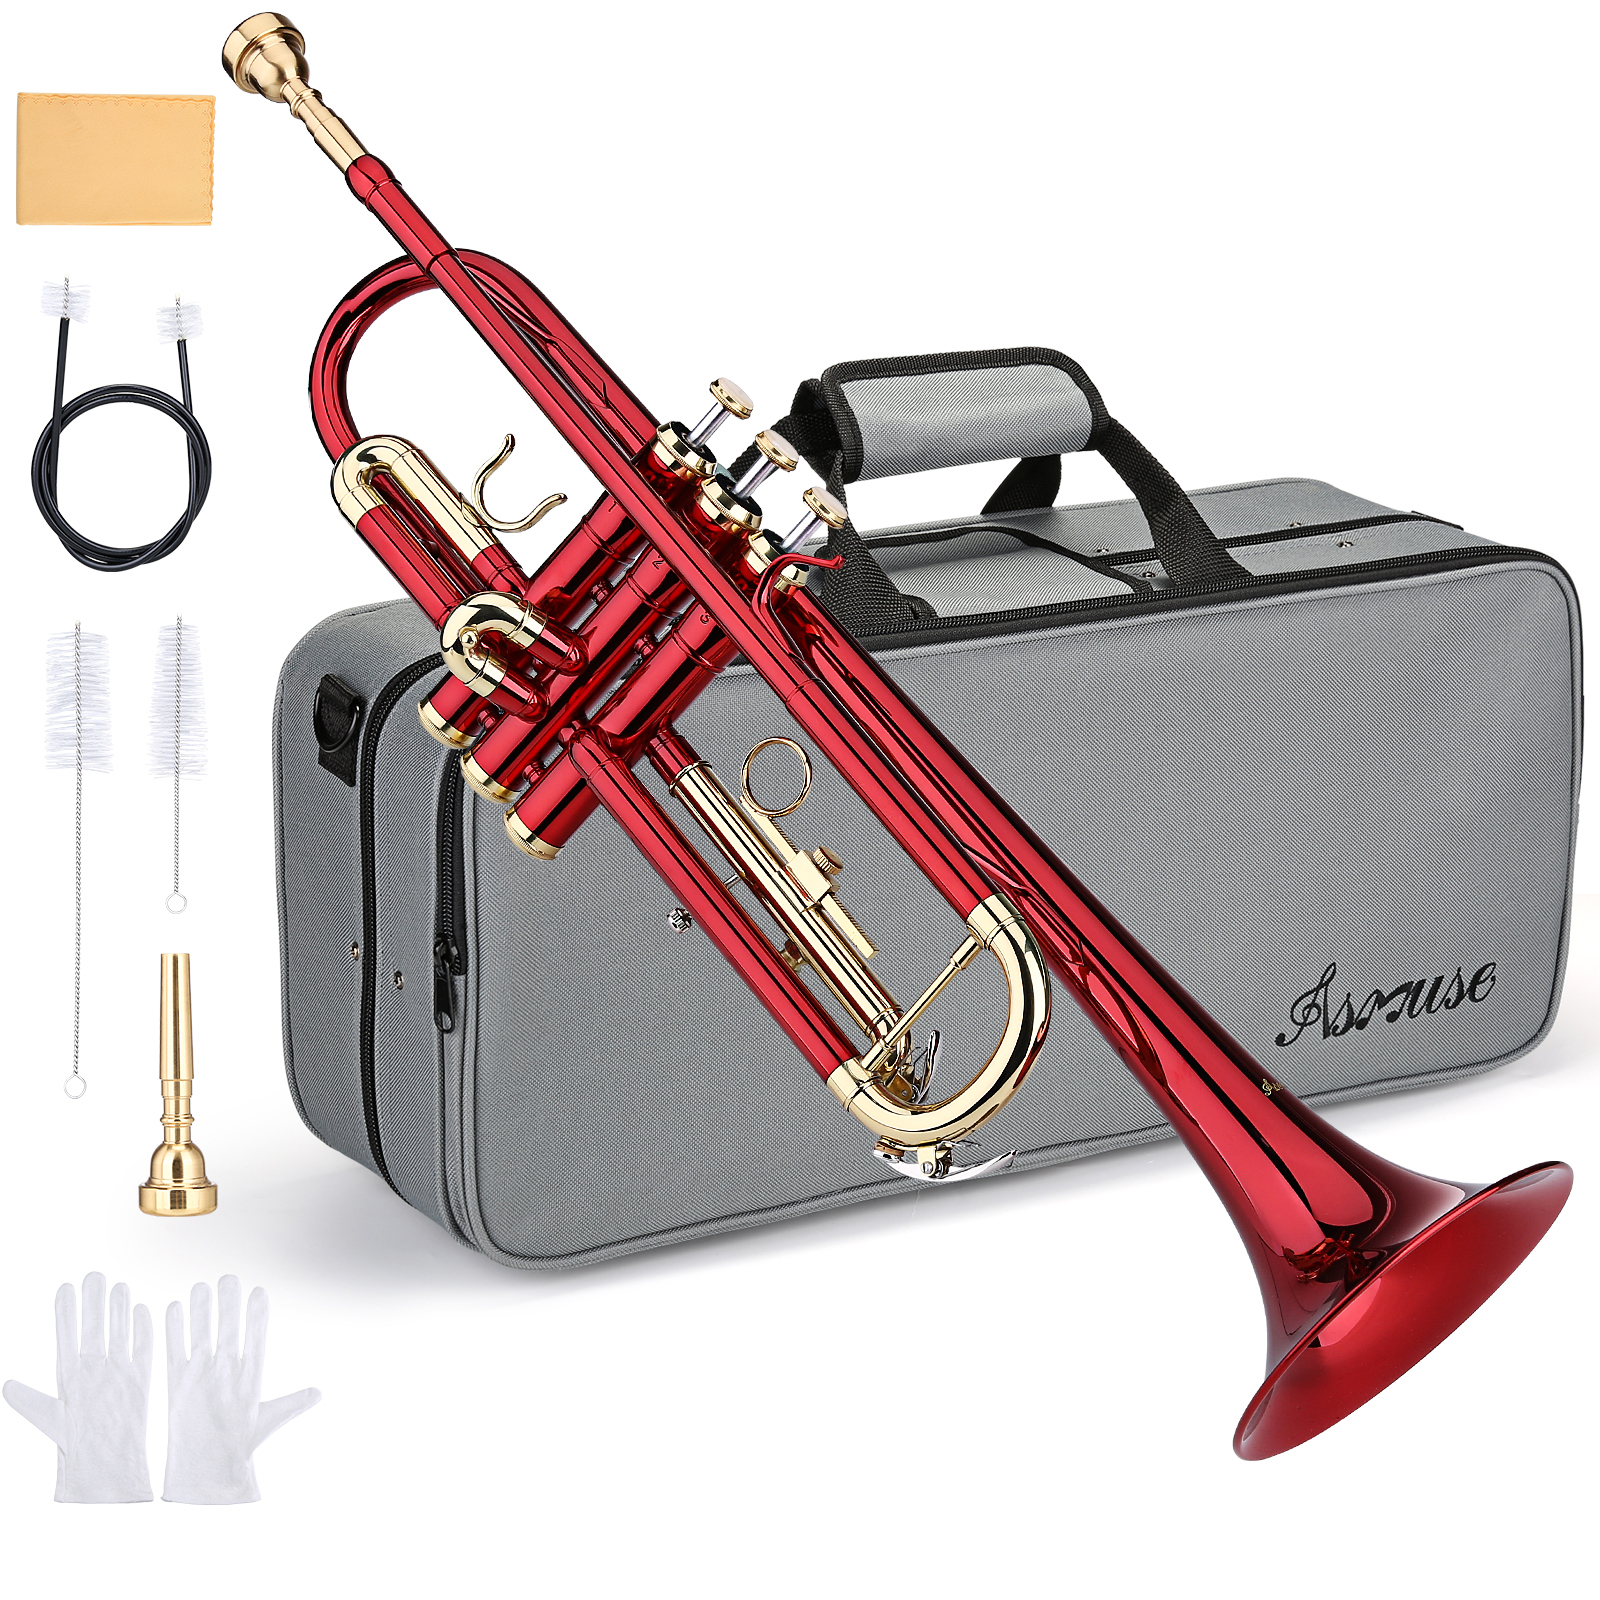 Color:Red:2024 BB TRUMPET STUDENT BAND TRUMPETS BRASS INSTRUMENT WITH CASE BEGINNER